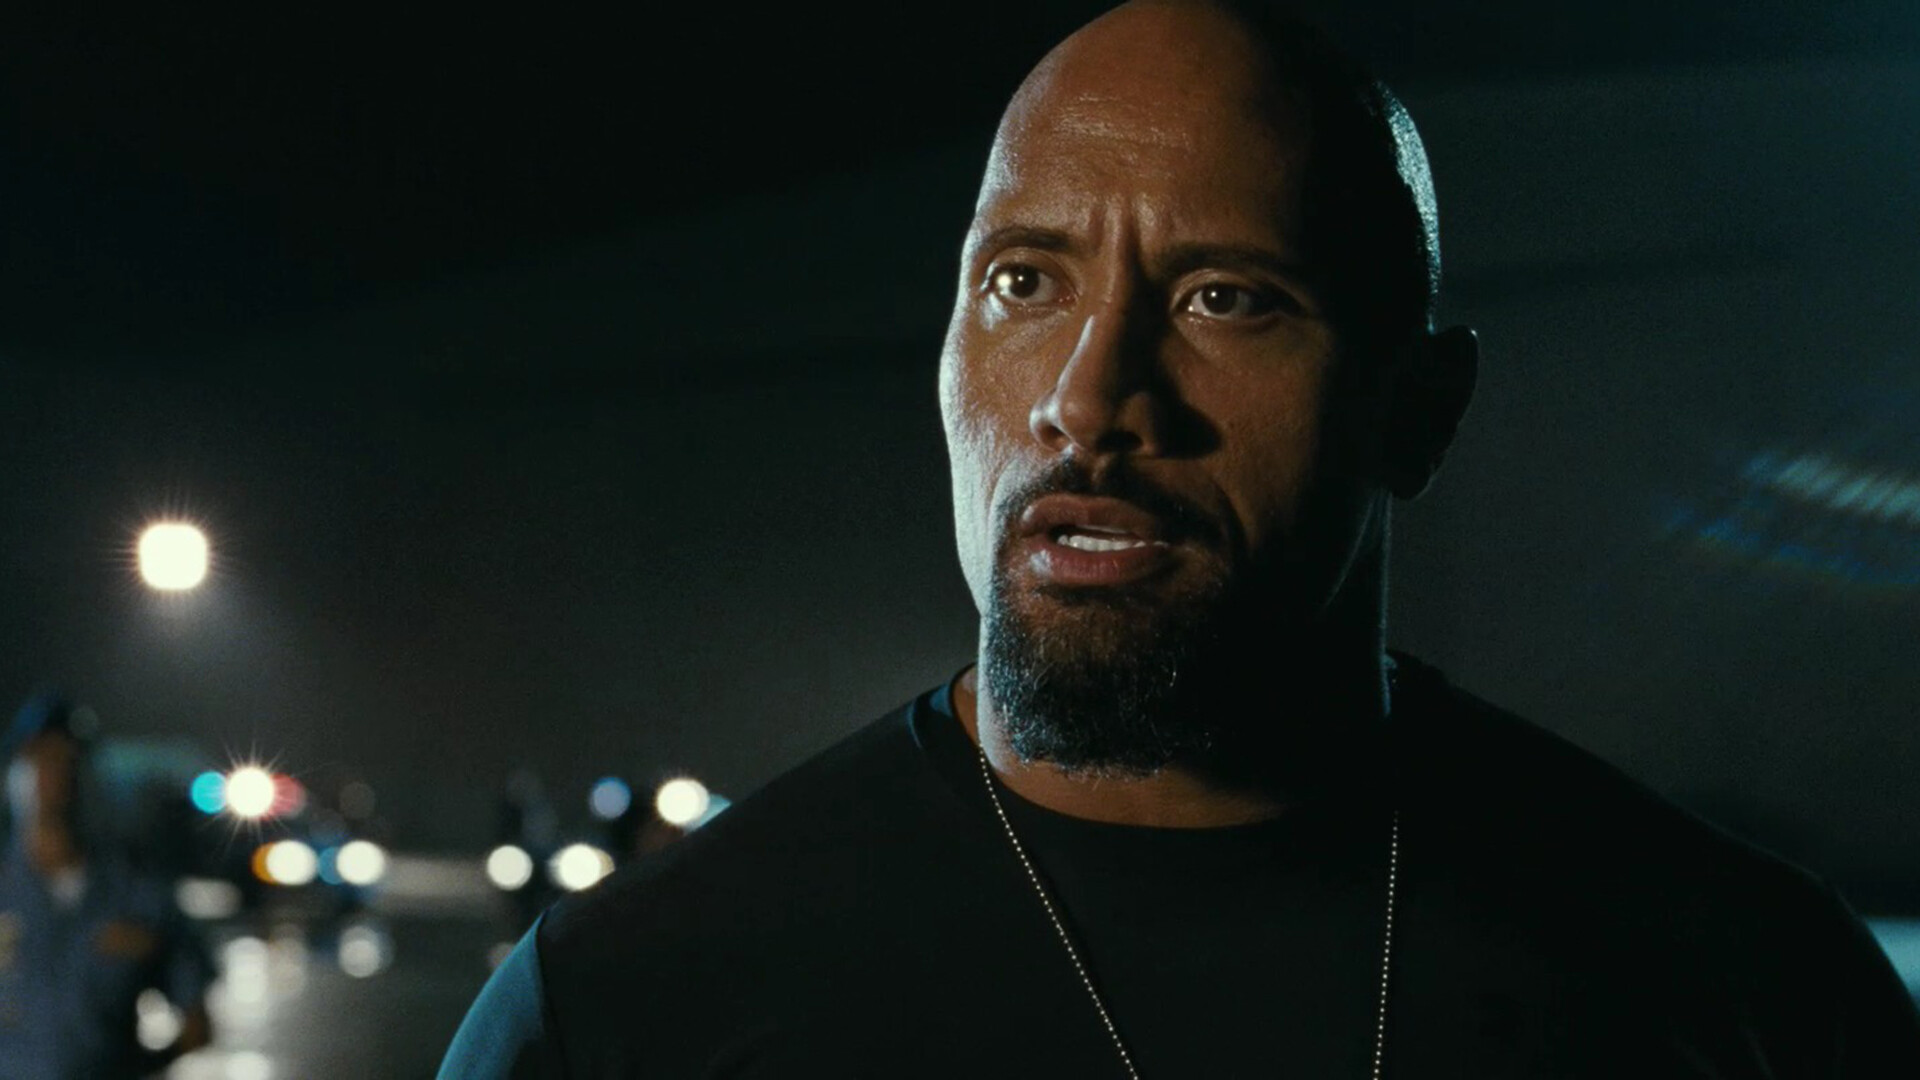 Dwayne Johnson: Lucas "Luke" Hobbs, a United States Diplomatic Security Service agent and bounty hunter. 1920x1080 Full HD Background.